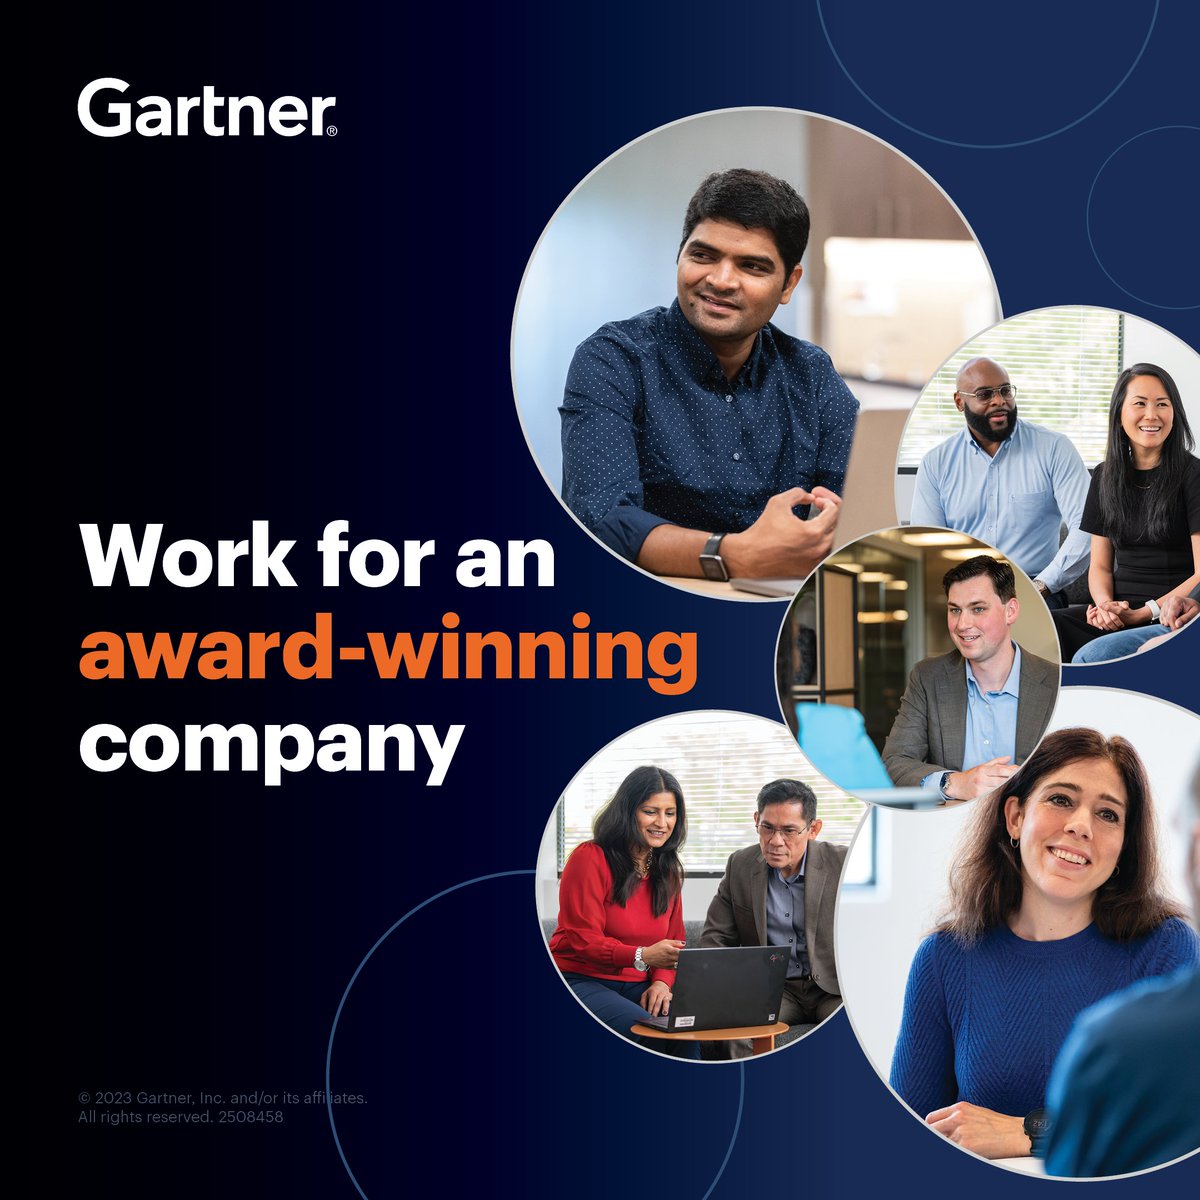 At Gartner, we guide leaders who shape the world, and each of our associates plays a vital role in our success. Learn more about our various accolades and what makes Gartner an employer of choice: gtnr.it/3QlpFmW

#LifeAtGartner #Awards